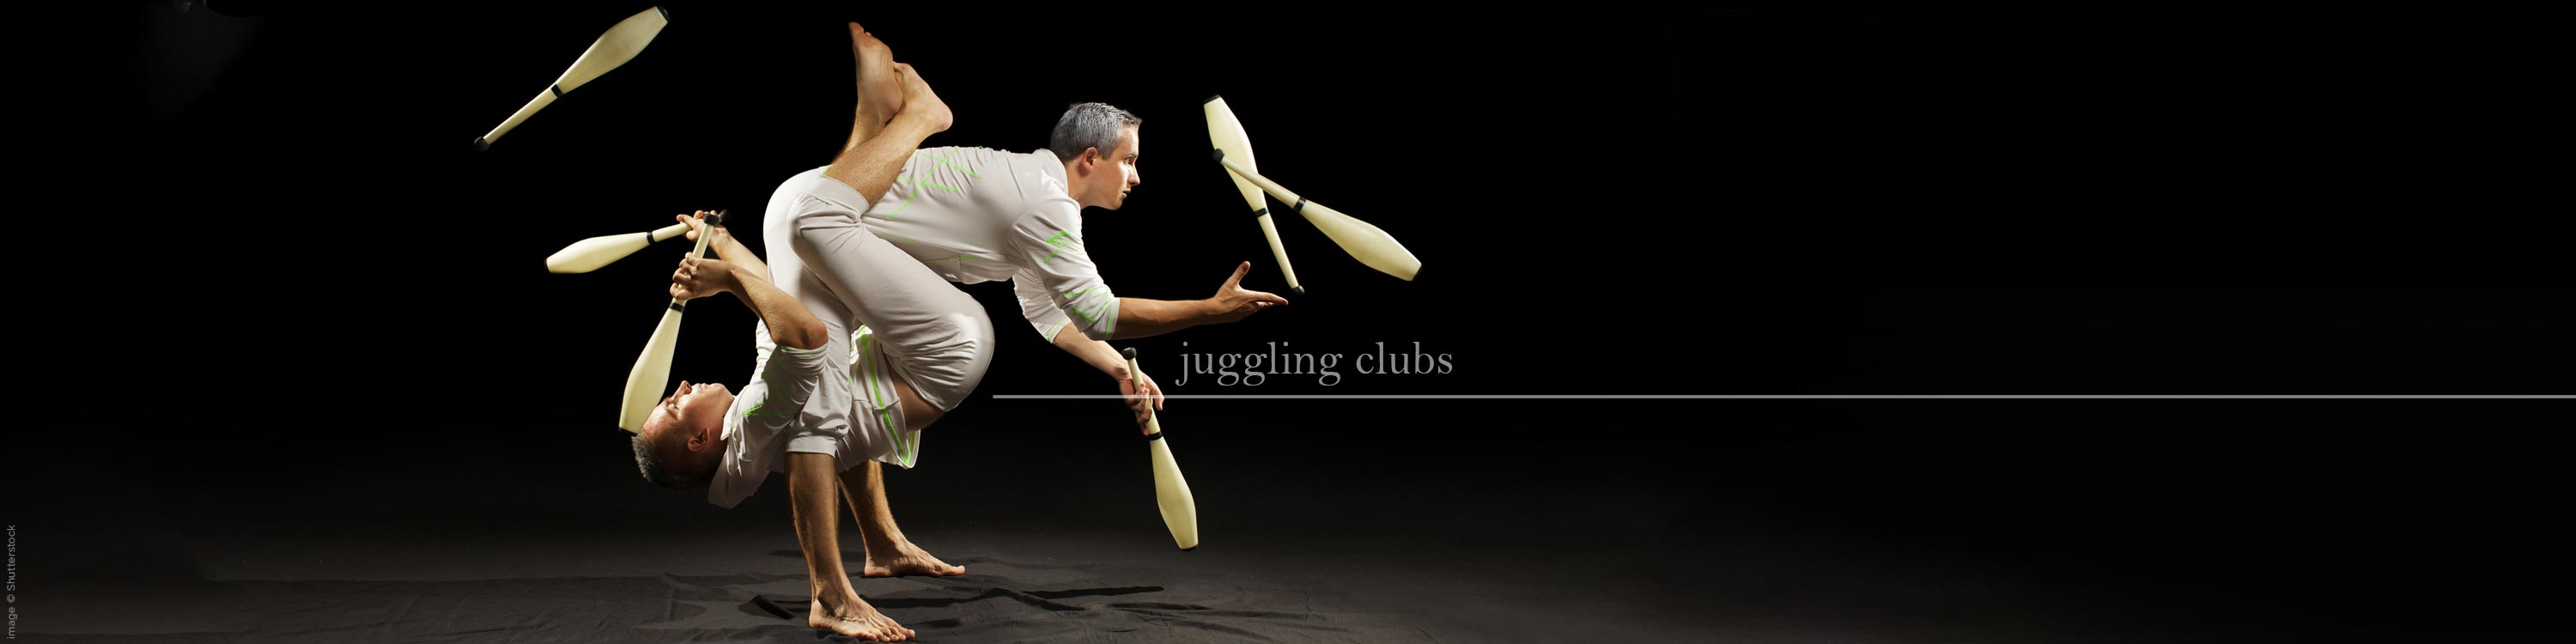 Juggling Clubs